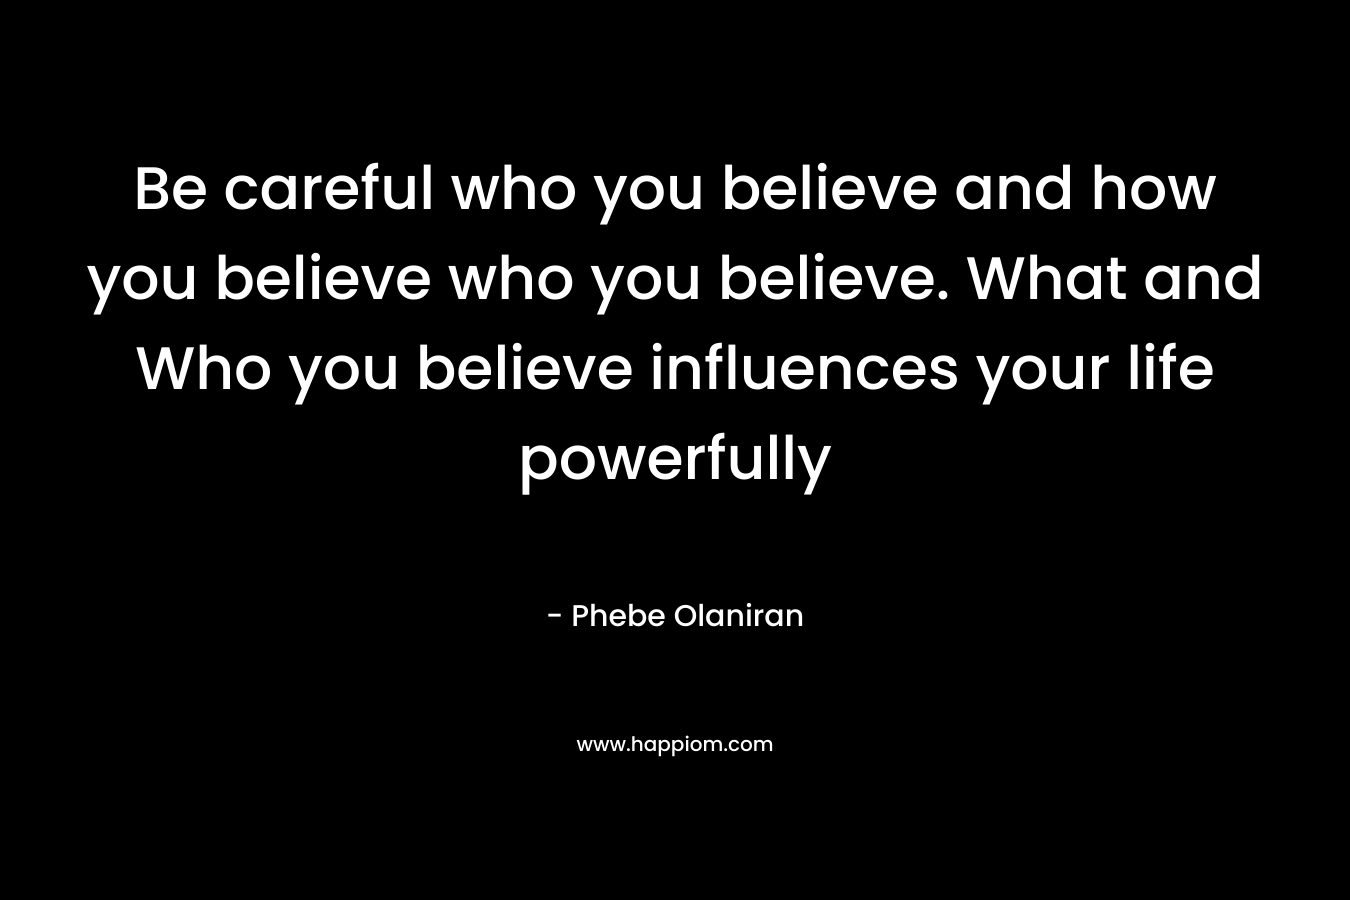 Be careful who you believe and how you believe who you believe. What and Who you believe influences your life powerfully